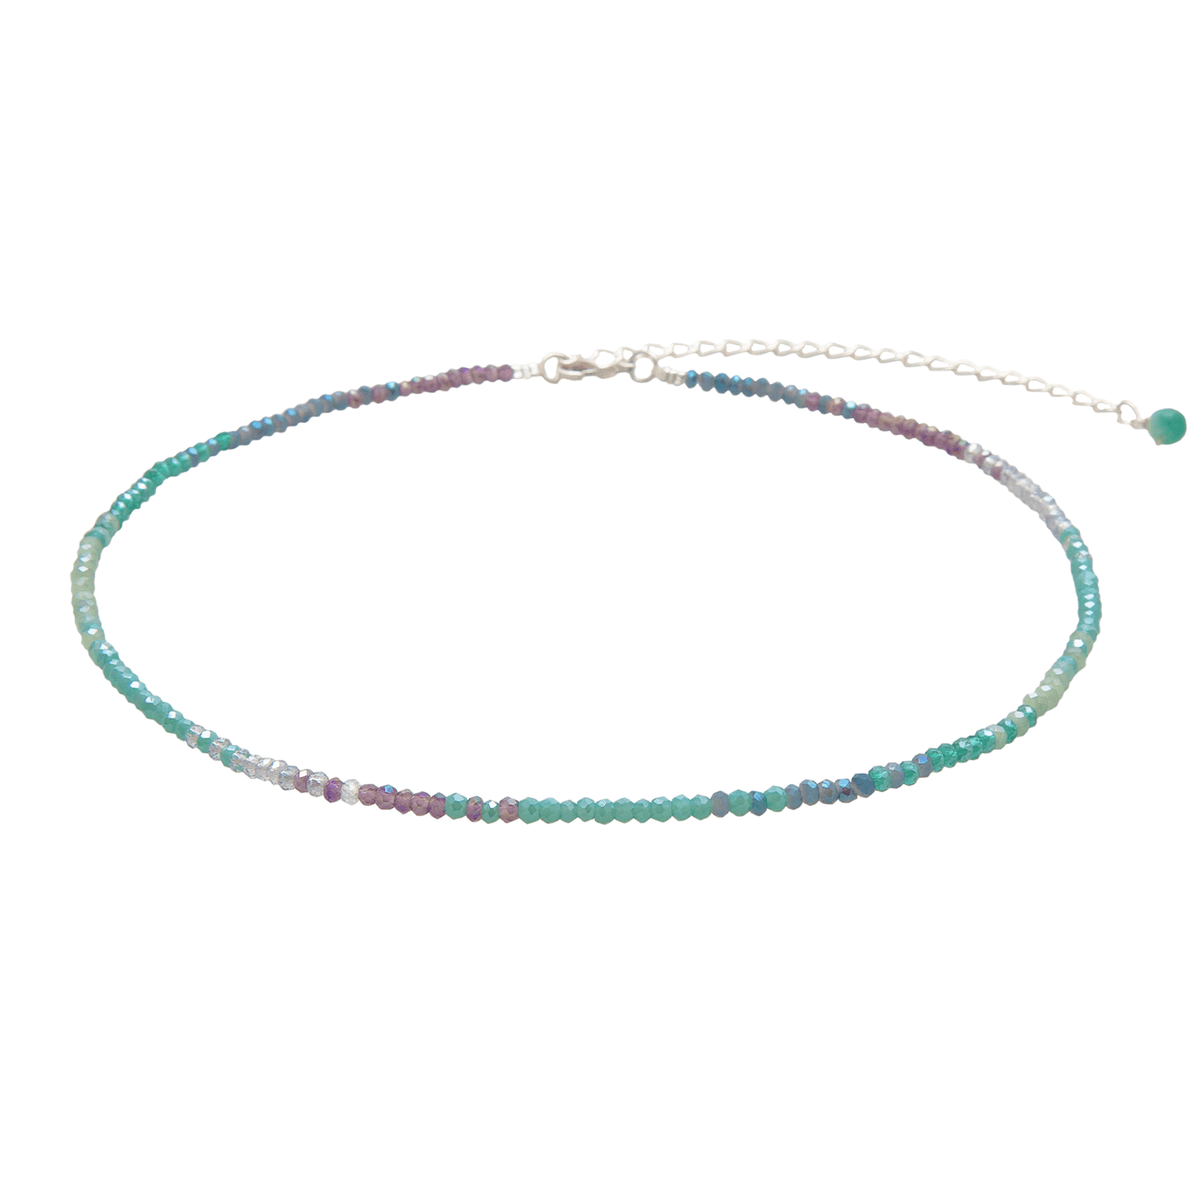 Purple, teal and blue stone goddess necklace on gold chain